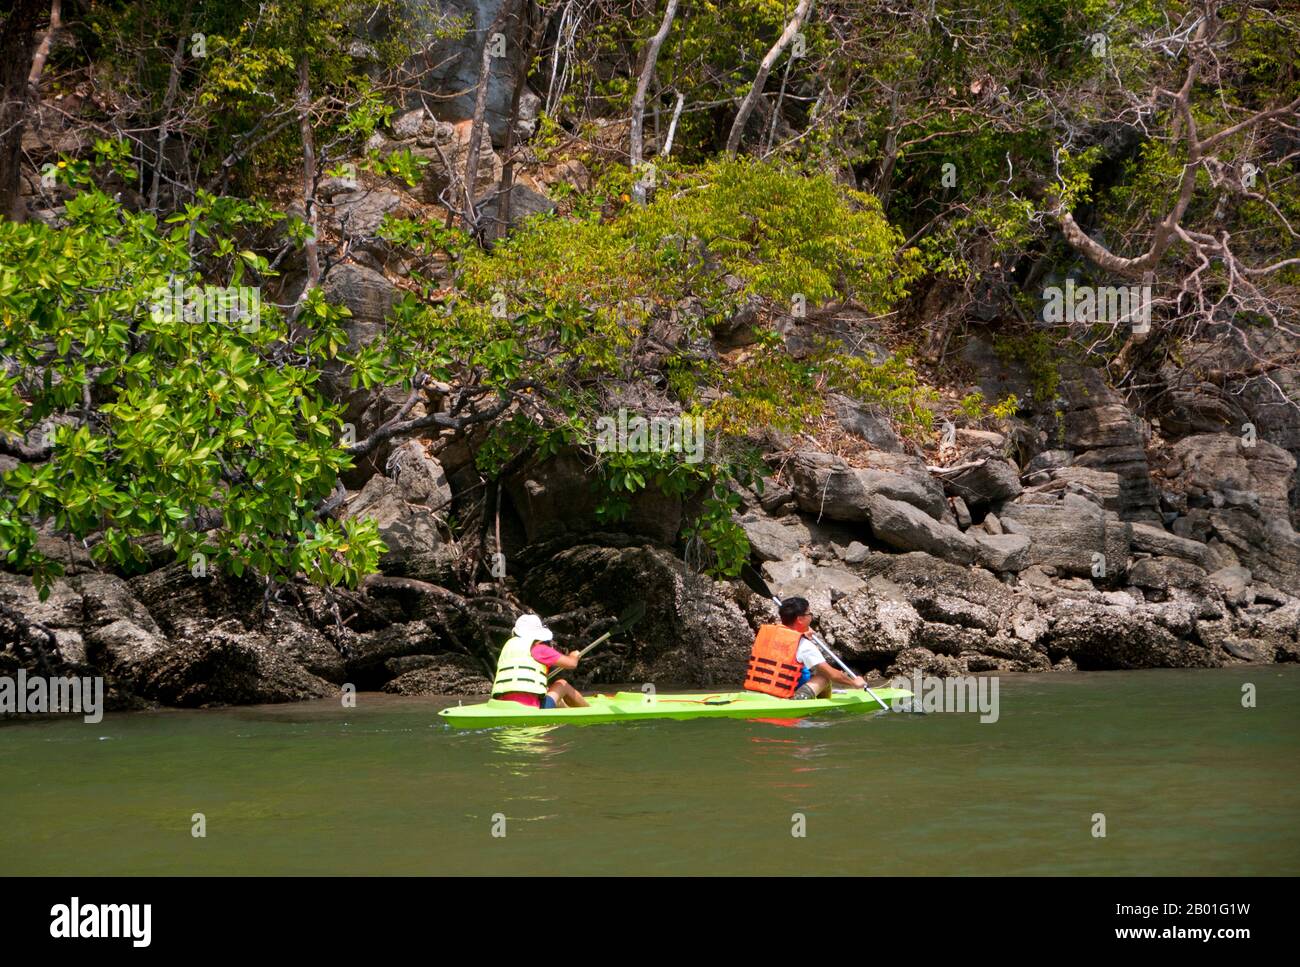 Thailand: Kayakers near the To-Bu (Toe-Boo) cliff area, Ko Tarutao, Ko Tarutao Marine National Park.  Ko Tarutao Marine National Park consists of 51 islands in two main groups scattered across the Andaman Sea in southernmost Thailand. Just seven of the islands are of any size, including Ko Tarutao in the east, and Ko Adang-Ko Rawi to the west. Just 5 miles (8 km) to the south lies the marine frontier with Malaysia’s celebrated Langkawi Archipelago.  Tarutao is world-famous for its pristine diving sites, rich marine life and outstanding natural beauty. Stock Photo